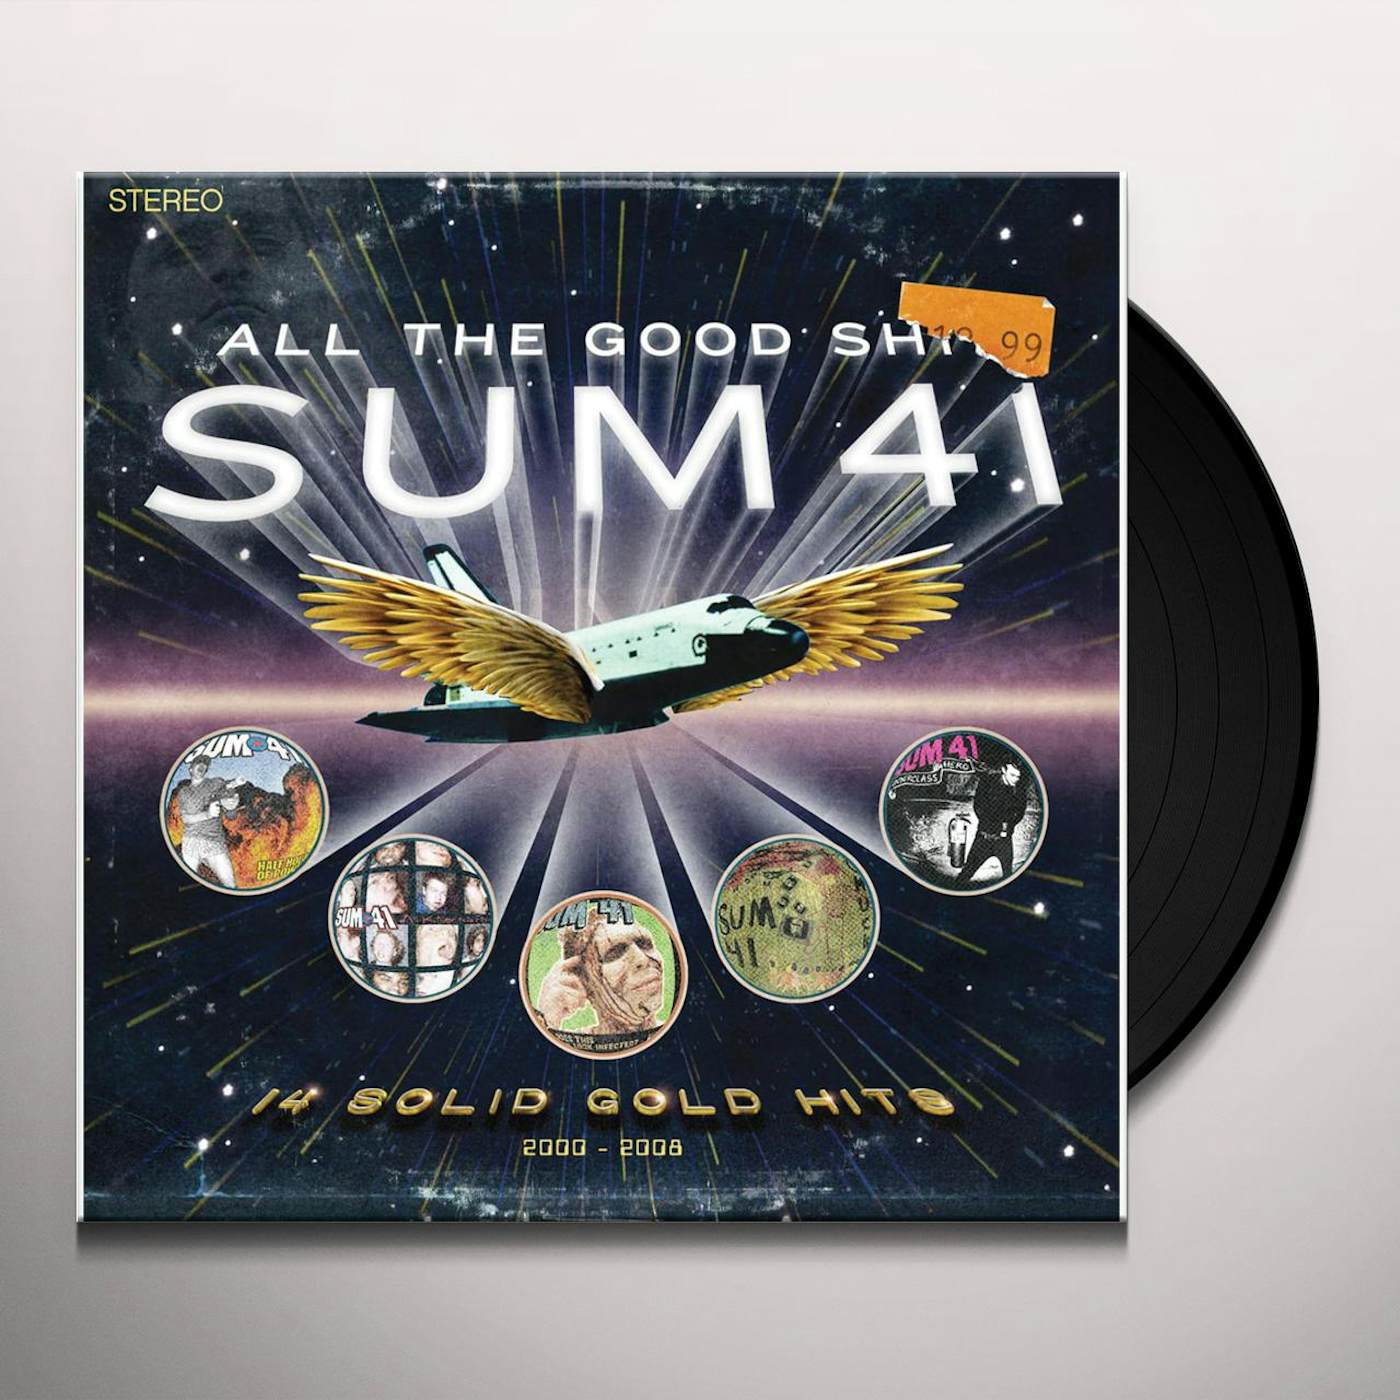 Sum 41 All The Good Sh**: 14 Solid Gold Hits 2001-2008 Vinyl Record